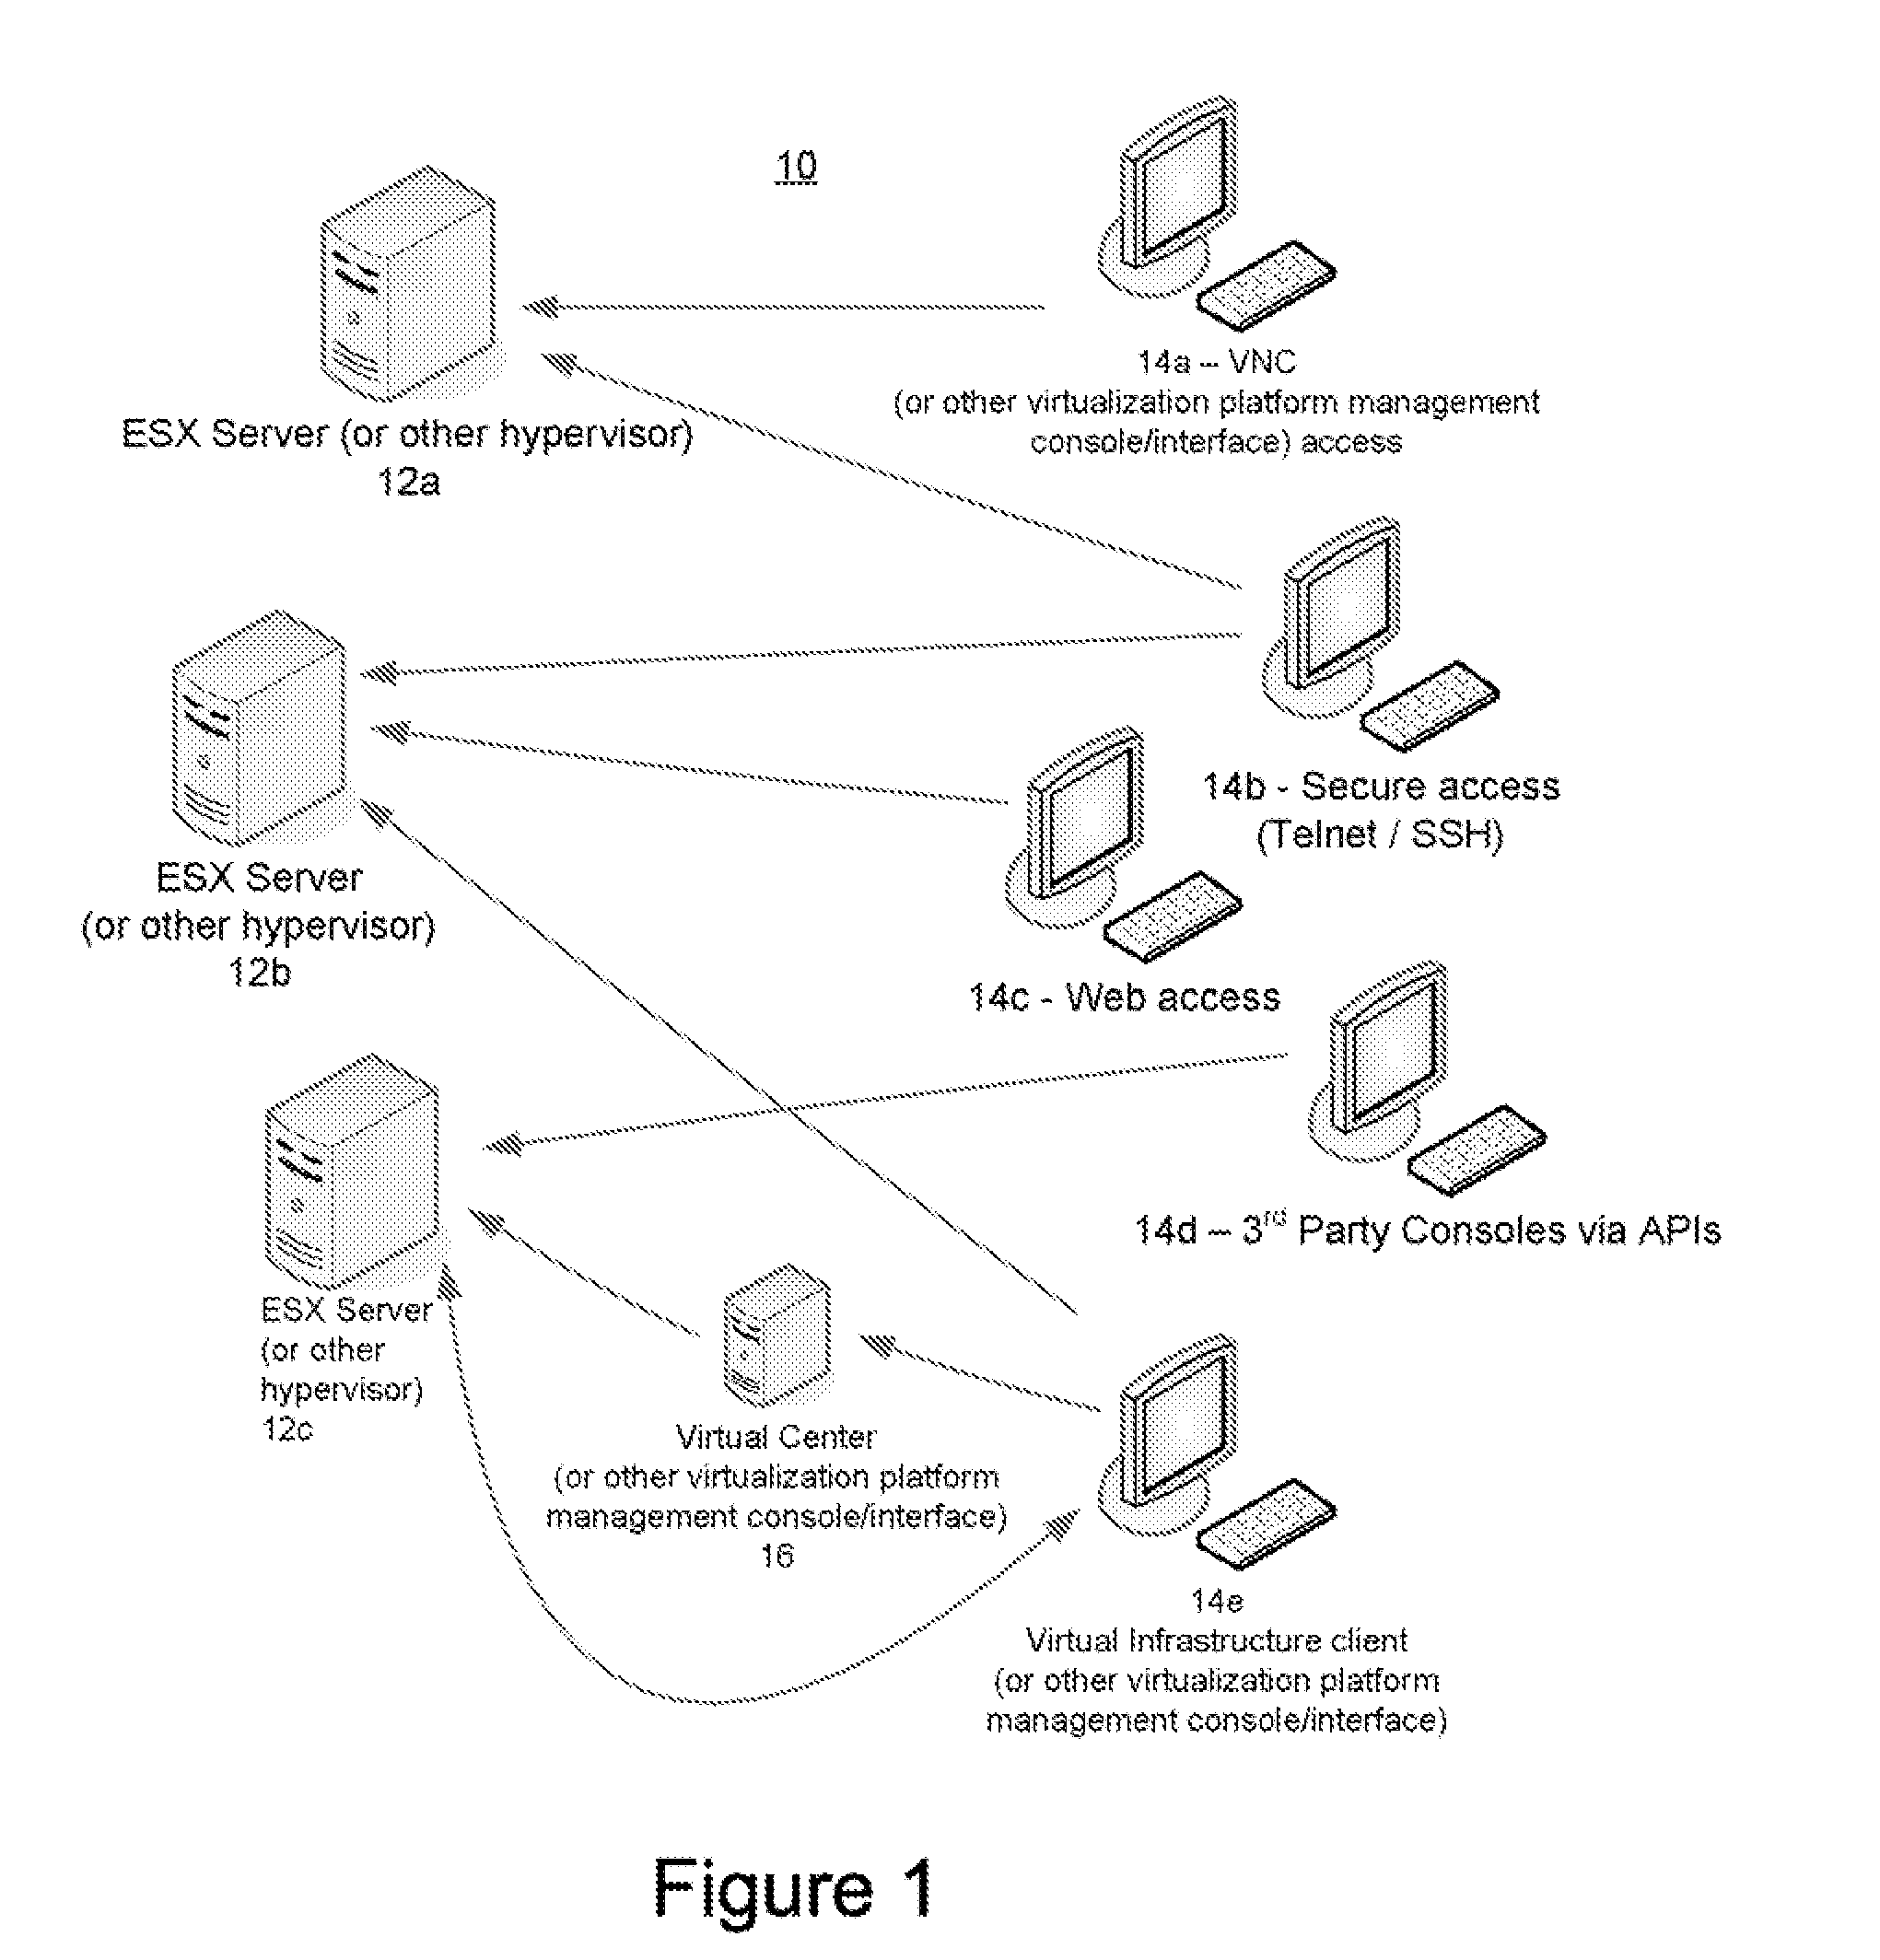 Methods and systems for securely managing virtualization platform